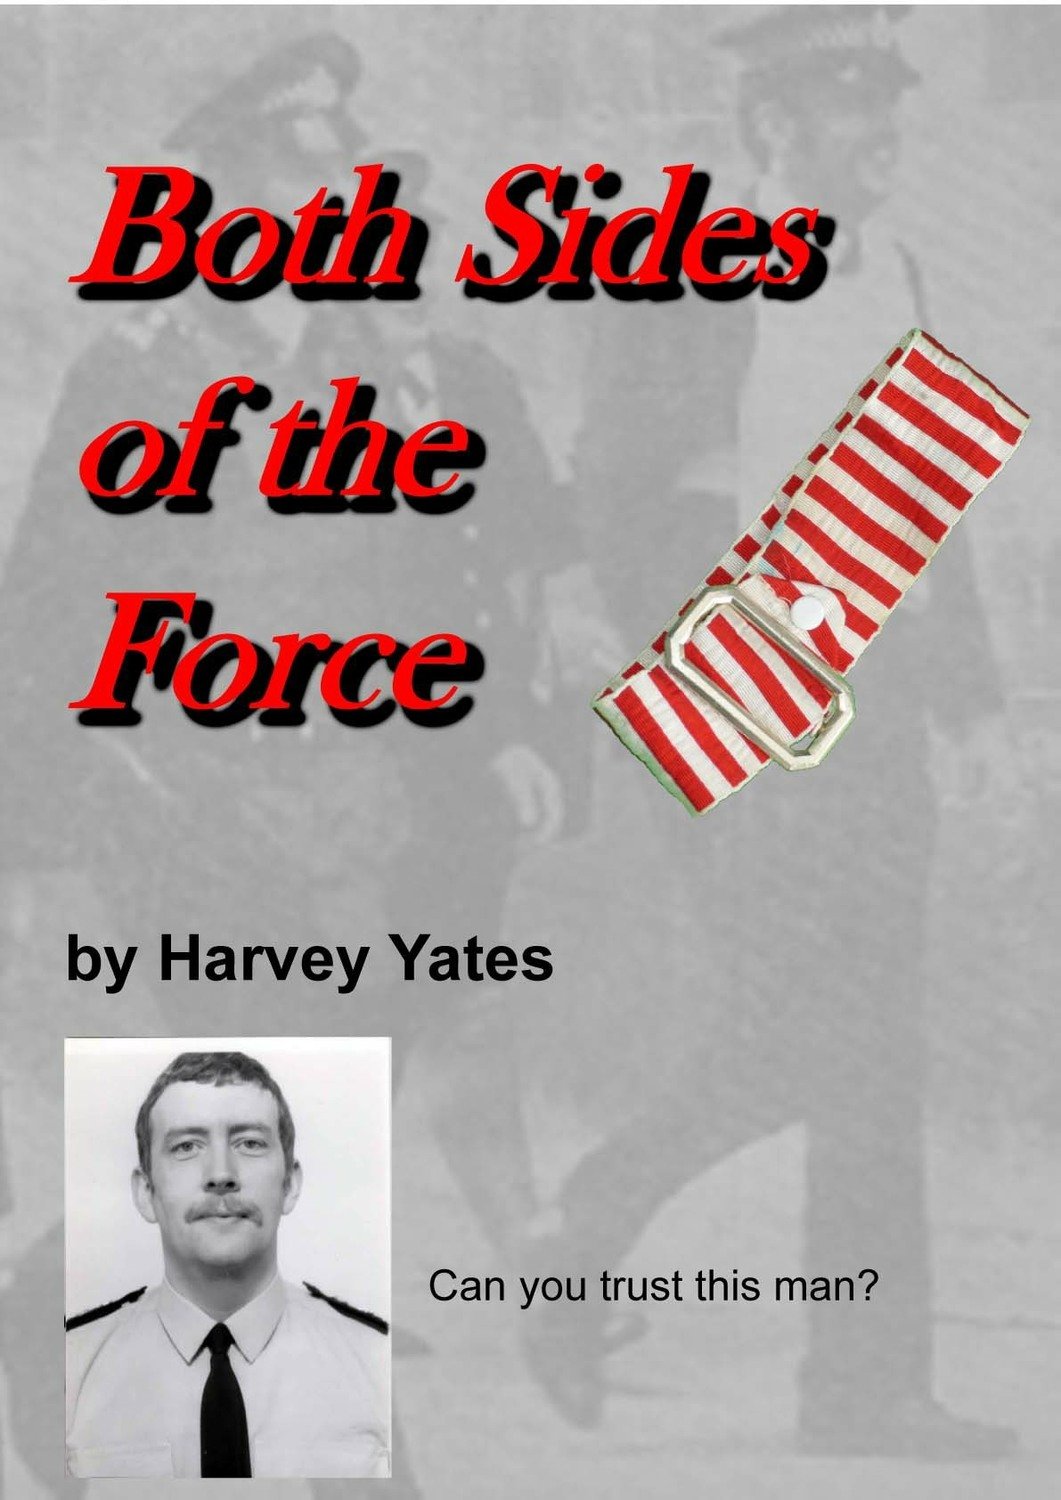 Bothe Sides of the Force